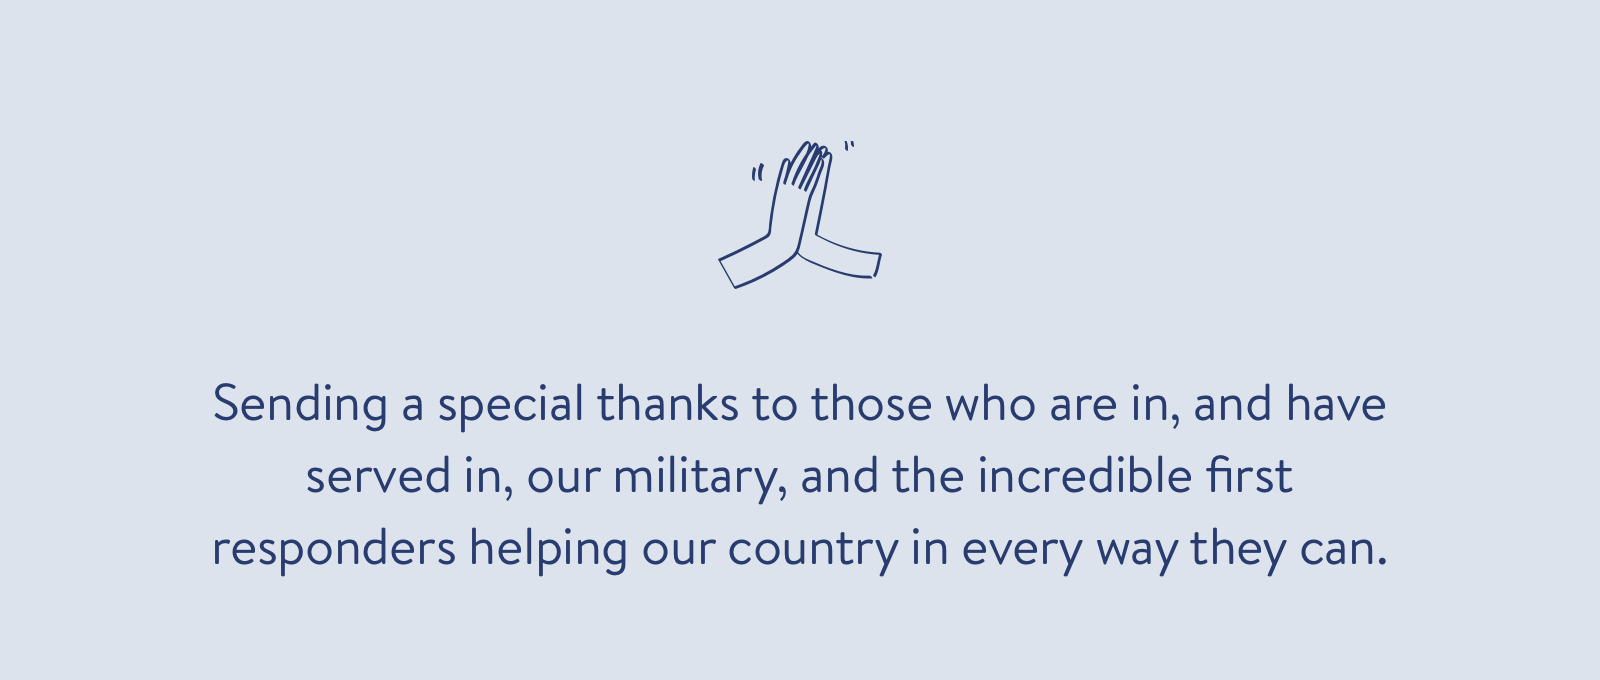 Sending a special thanks to those who are in, and have served in, our military, and the incredible first responders helping our country in every way they can.